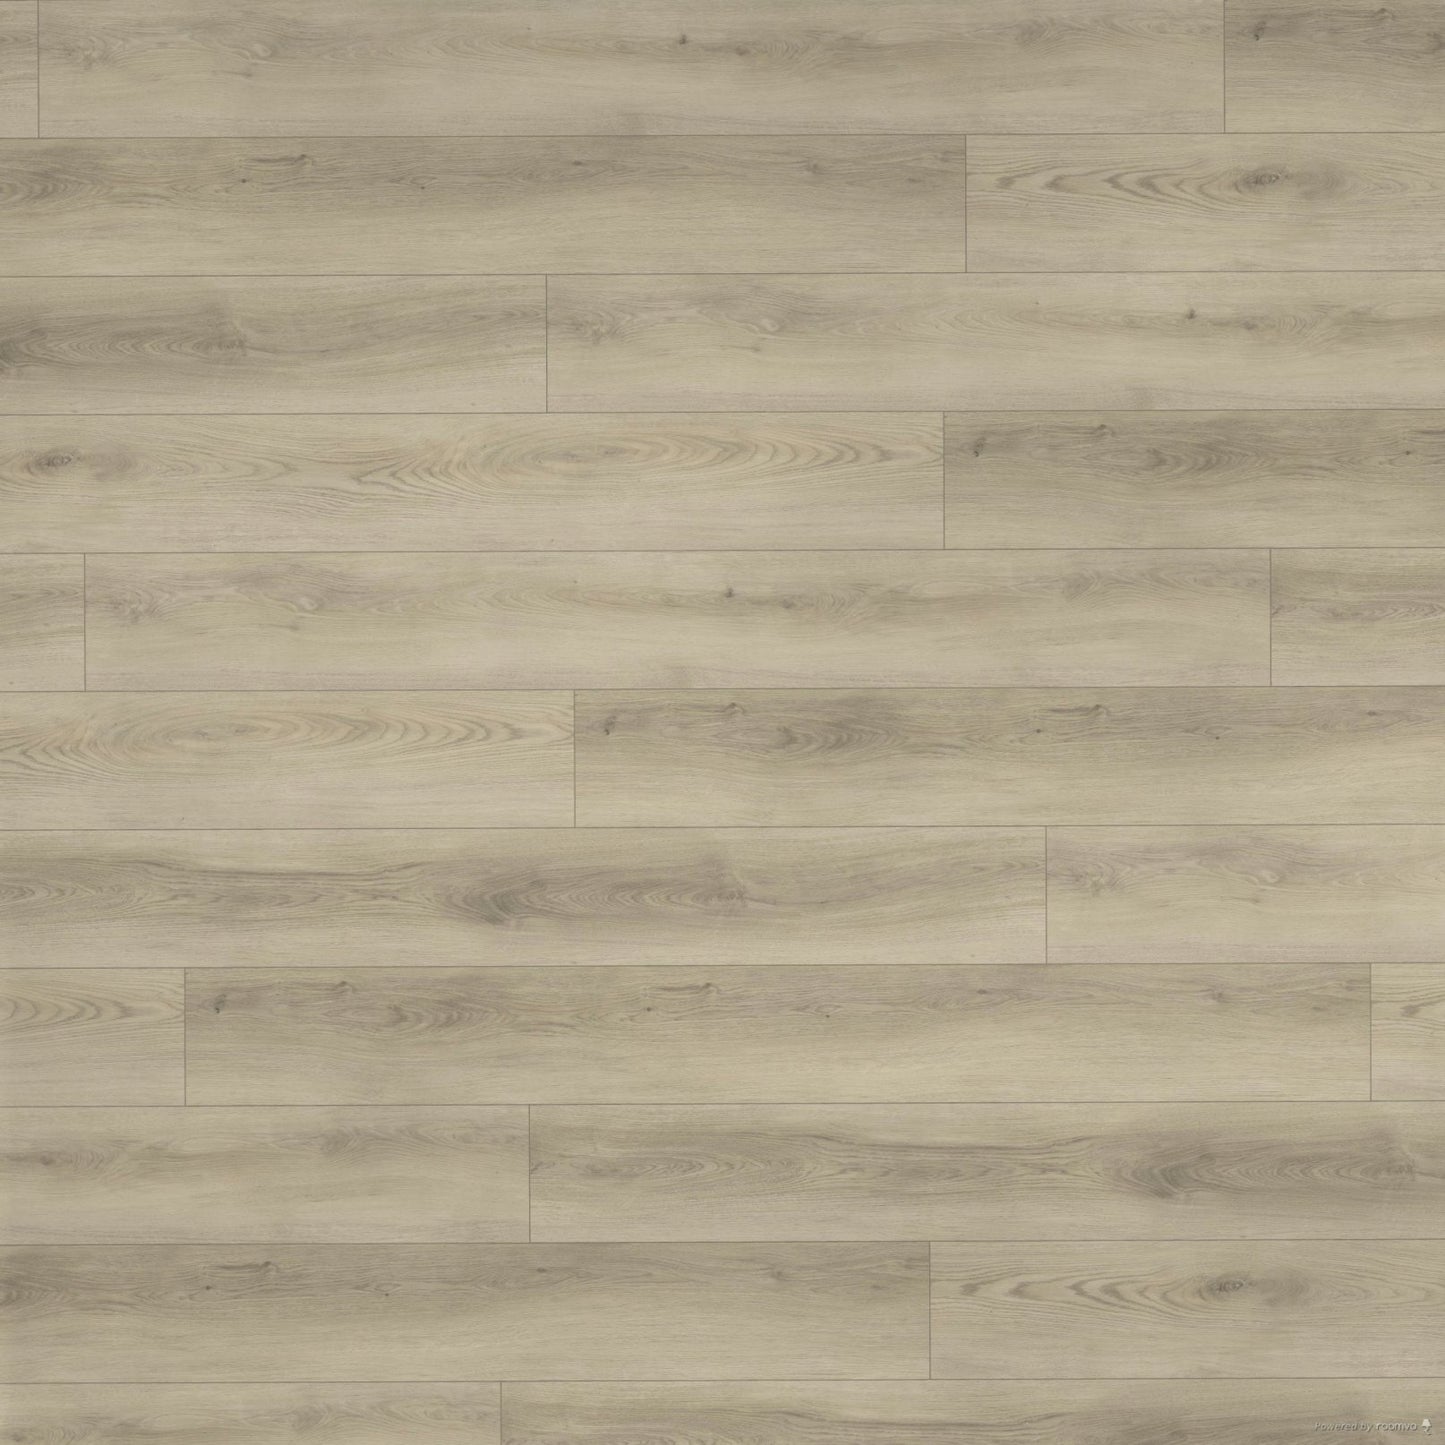 Hewn Join Select Stoneform Luxury Plank Flooring Swatch